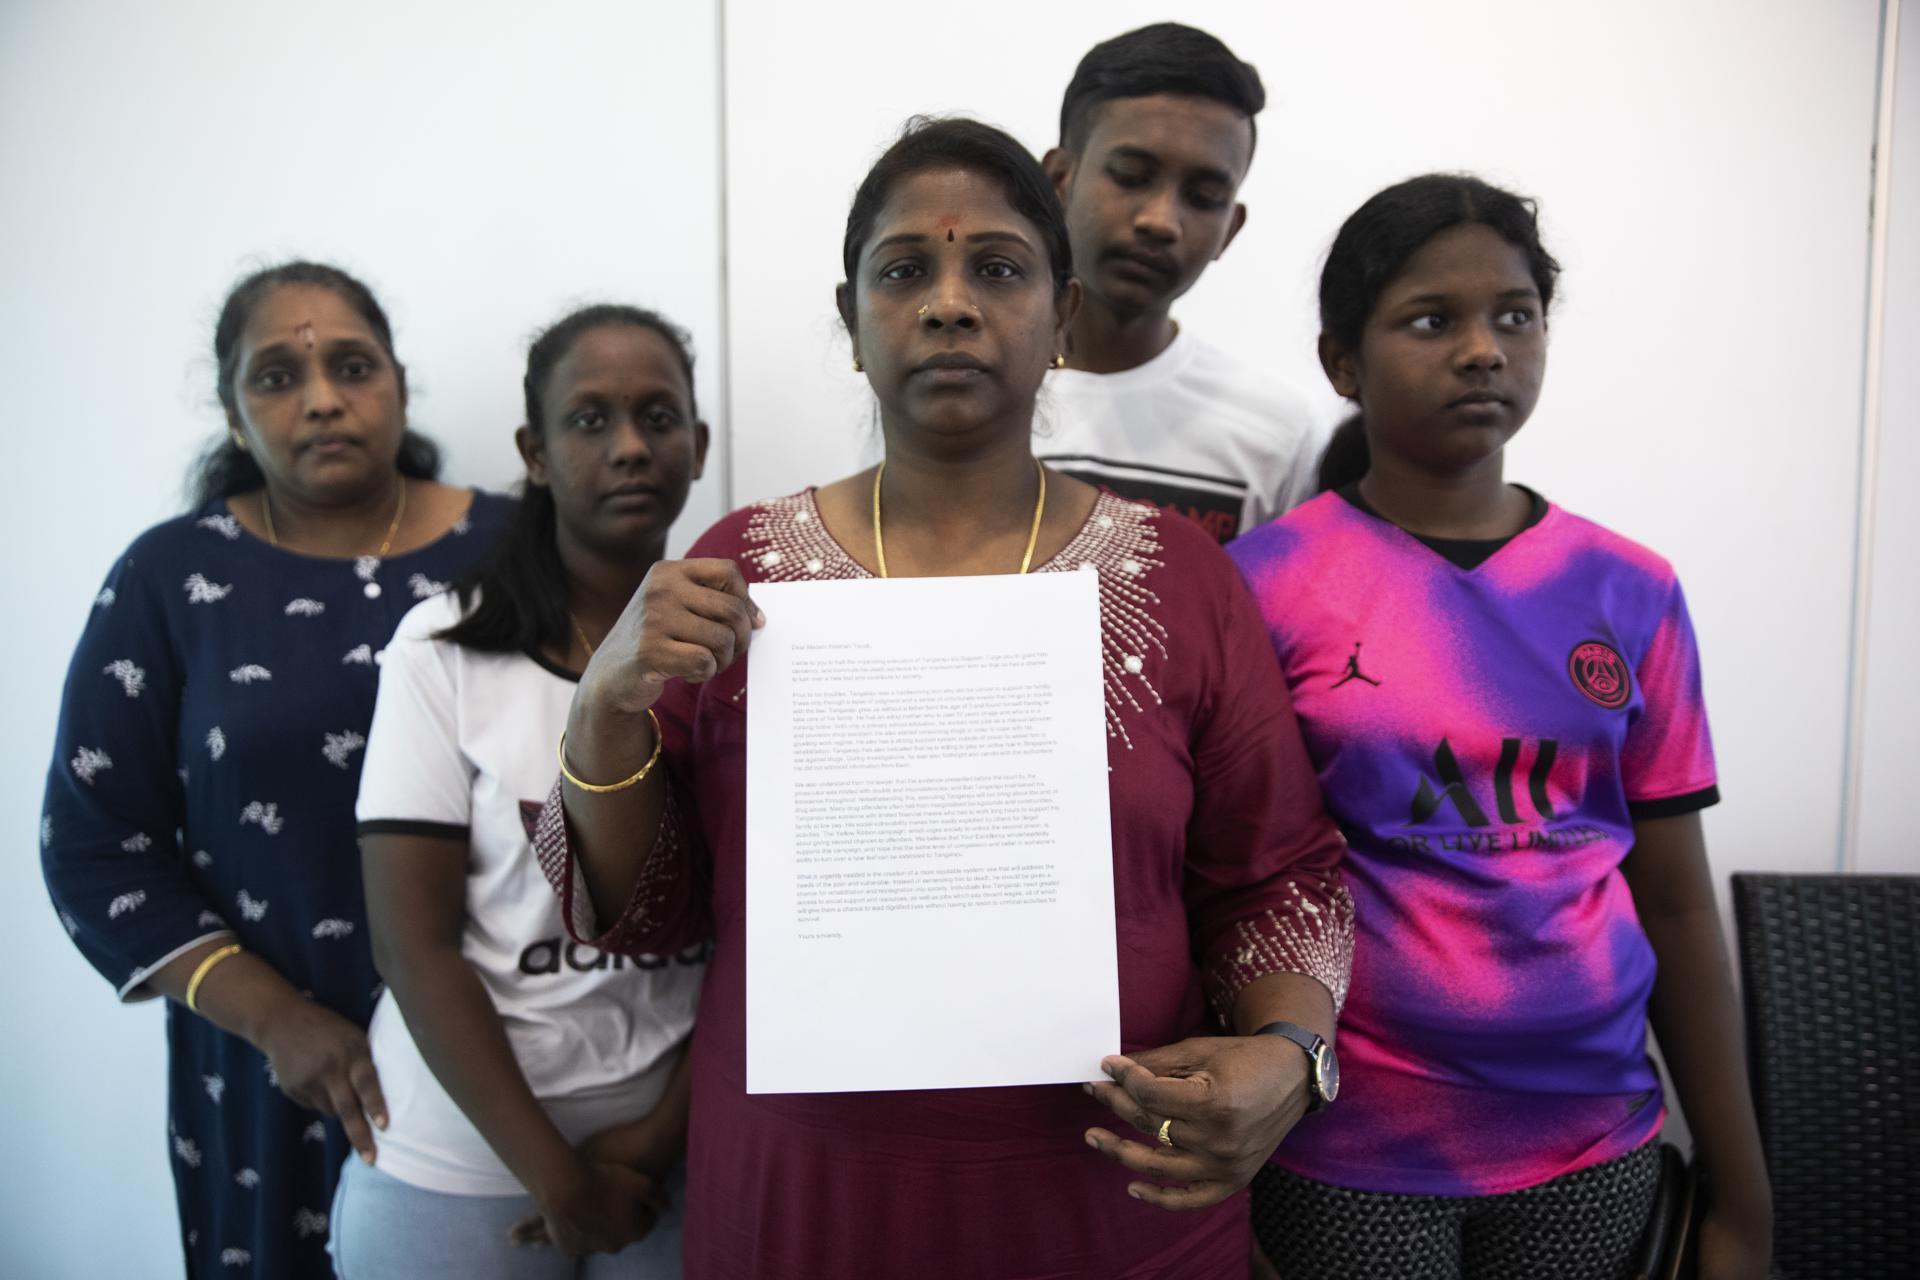 Leela (C), sister of death row inmate Tangaraju Suppiah, and family members Sinnapillai (L), Subhashini, (2-L), Thaadshayani (2-R), and Sharan (R), pose for a photo while holding a letter appealing for the President to grant him clemency during a press conference in Singapore, 23 April 2023. EFE-EPA FILE/HOW HWEE YOUNG